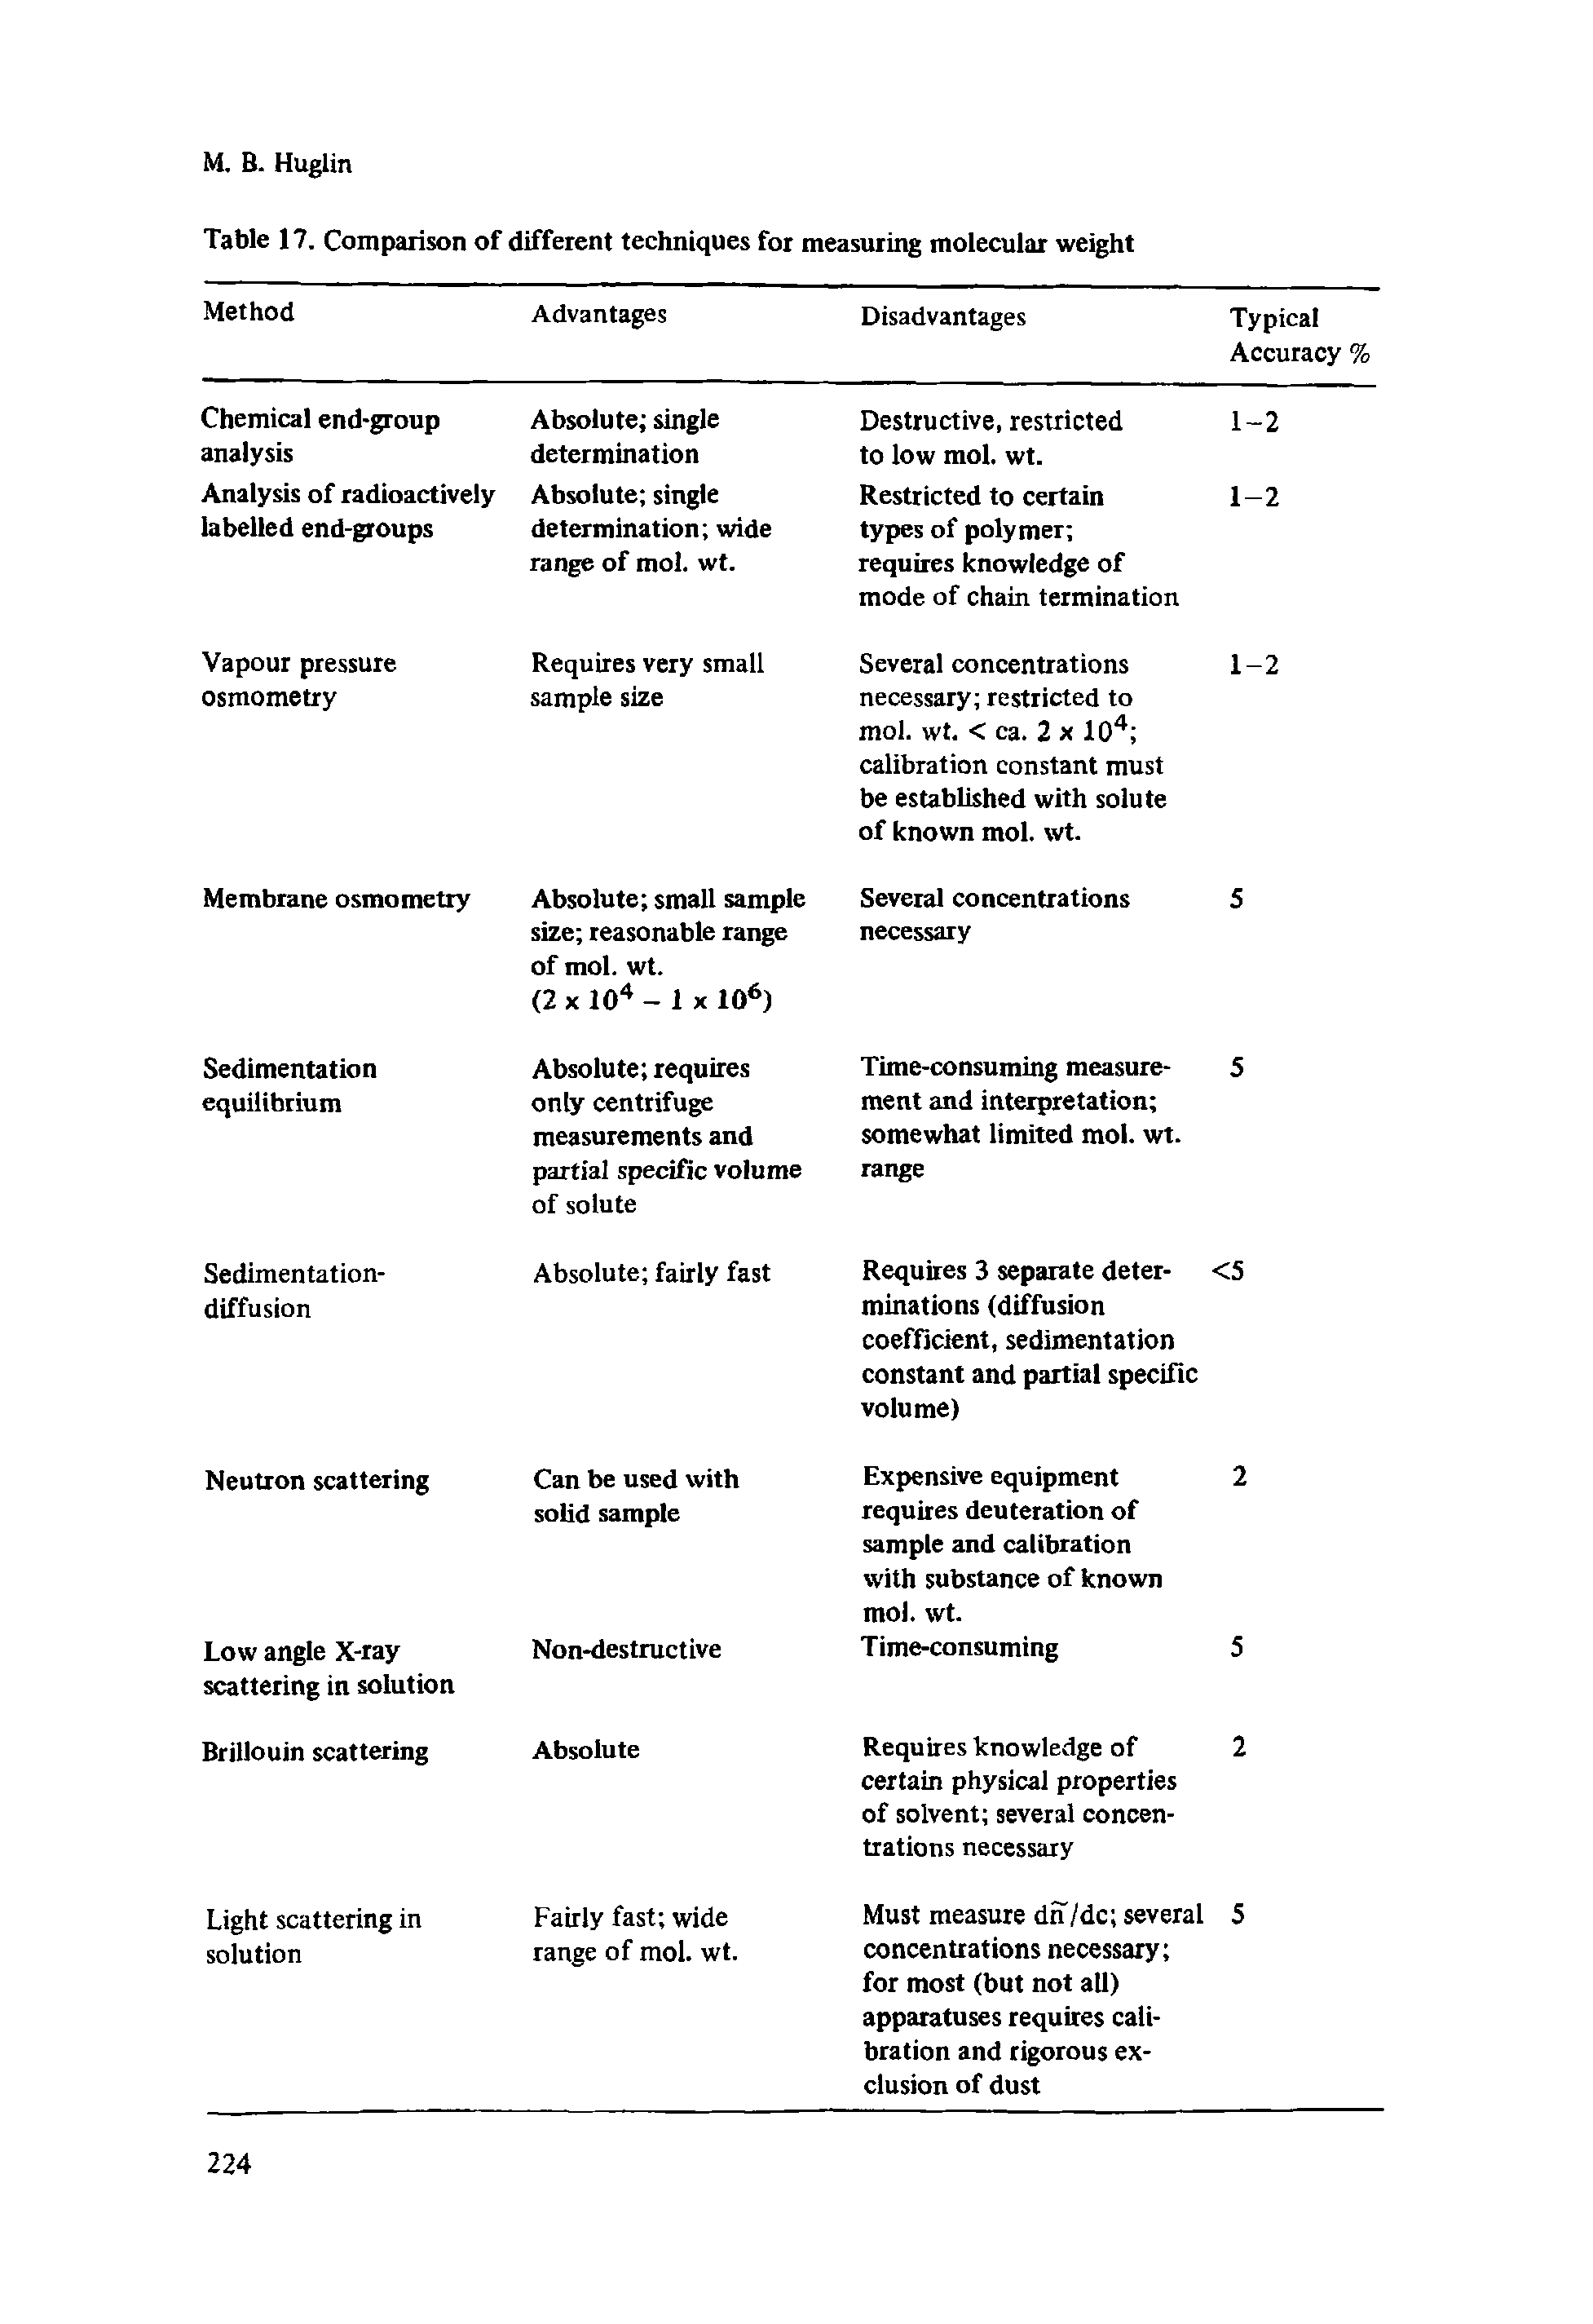 Table 17. Comparison of different techniques for measuring molecular weight...